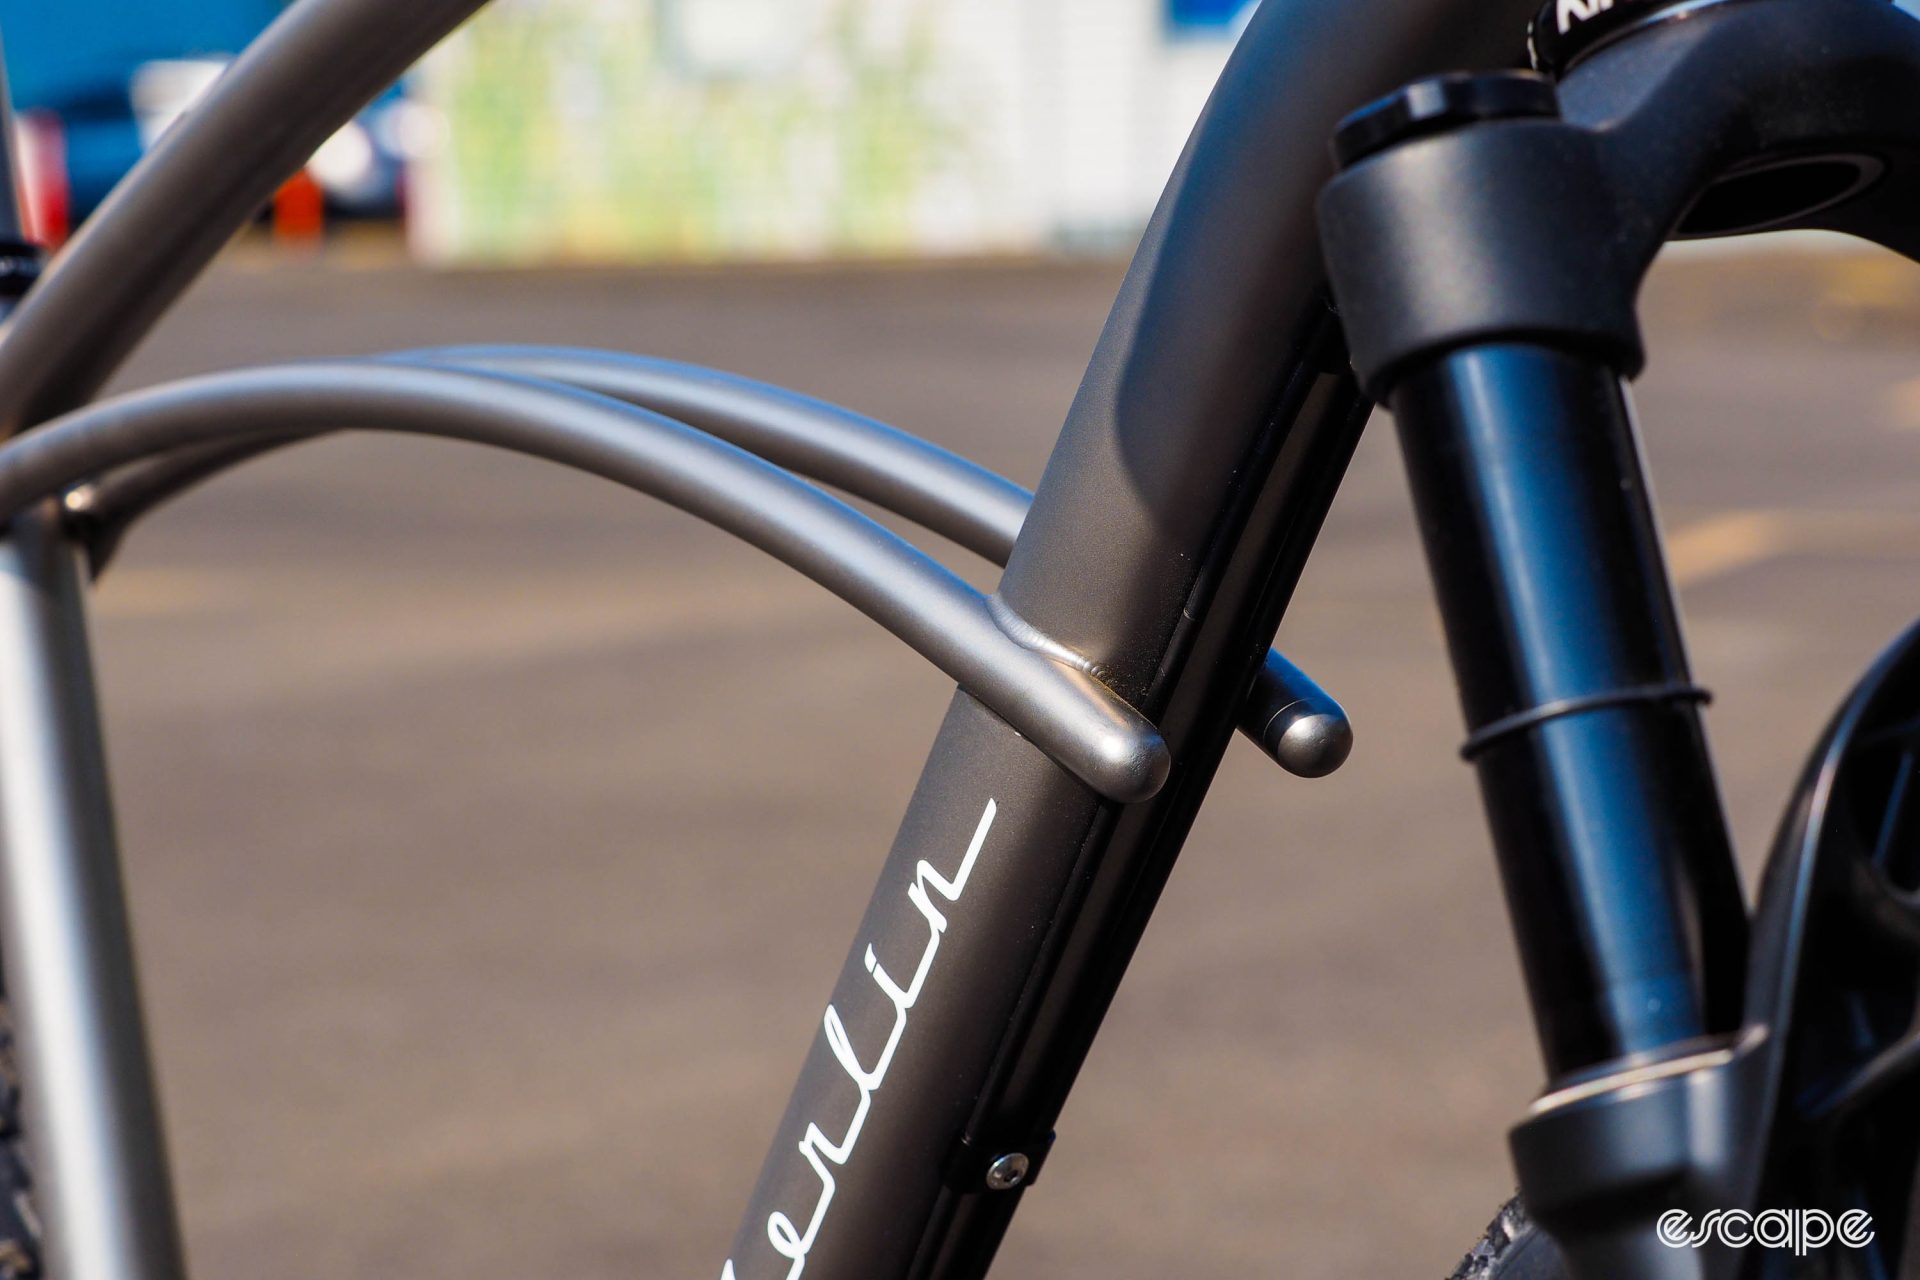 Detail shot of curved seatstays meeting on the downtube.